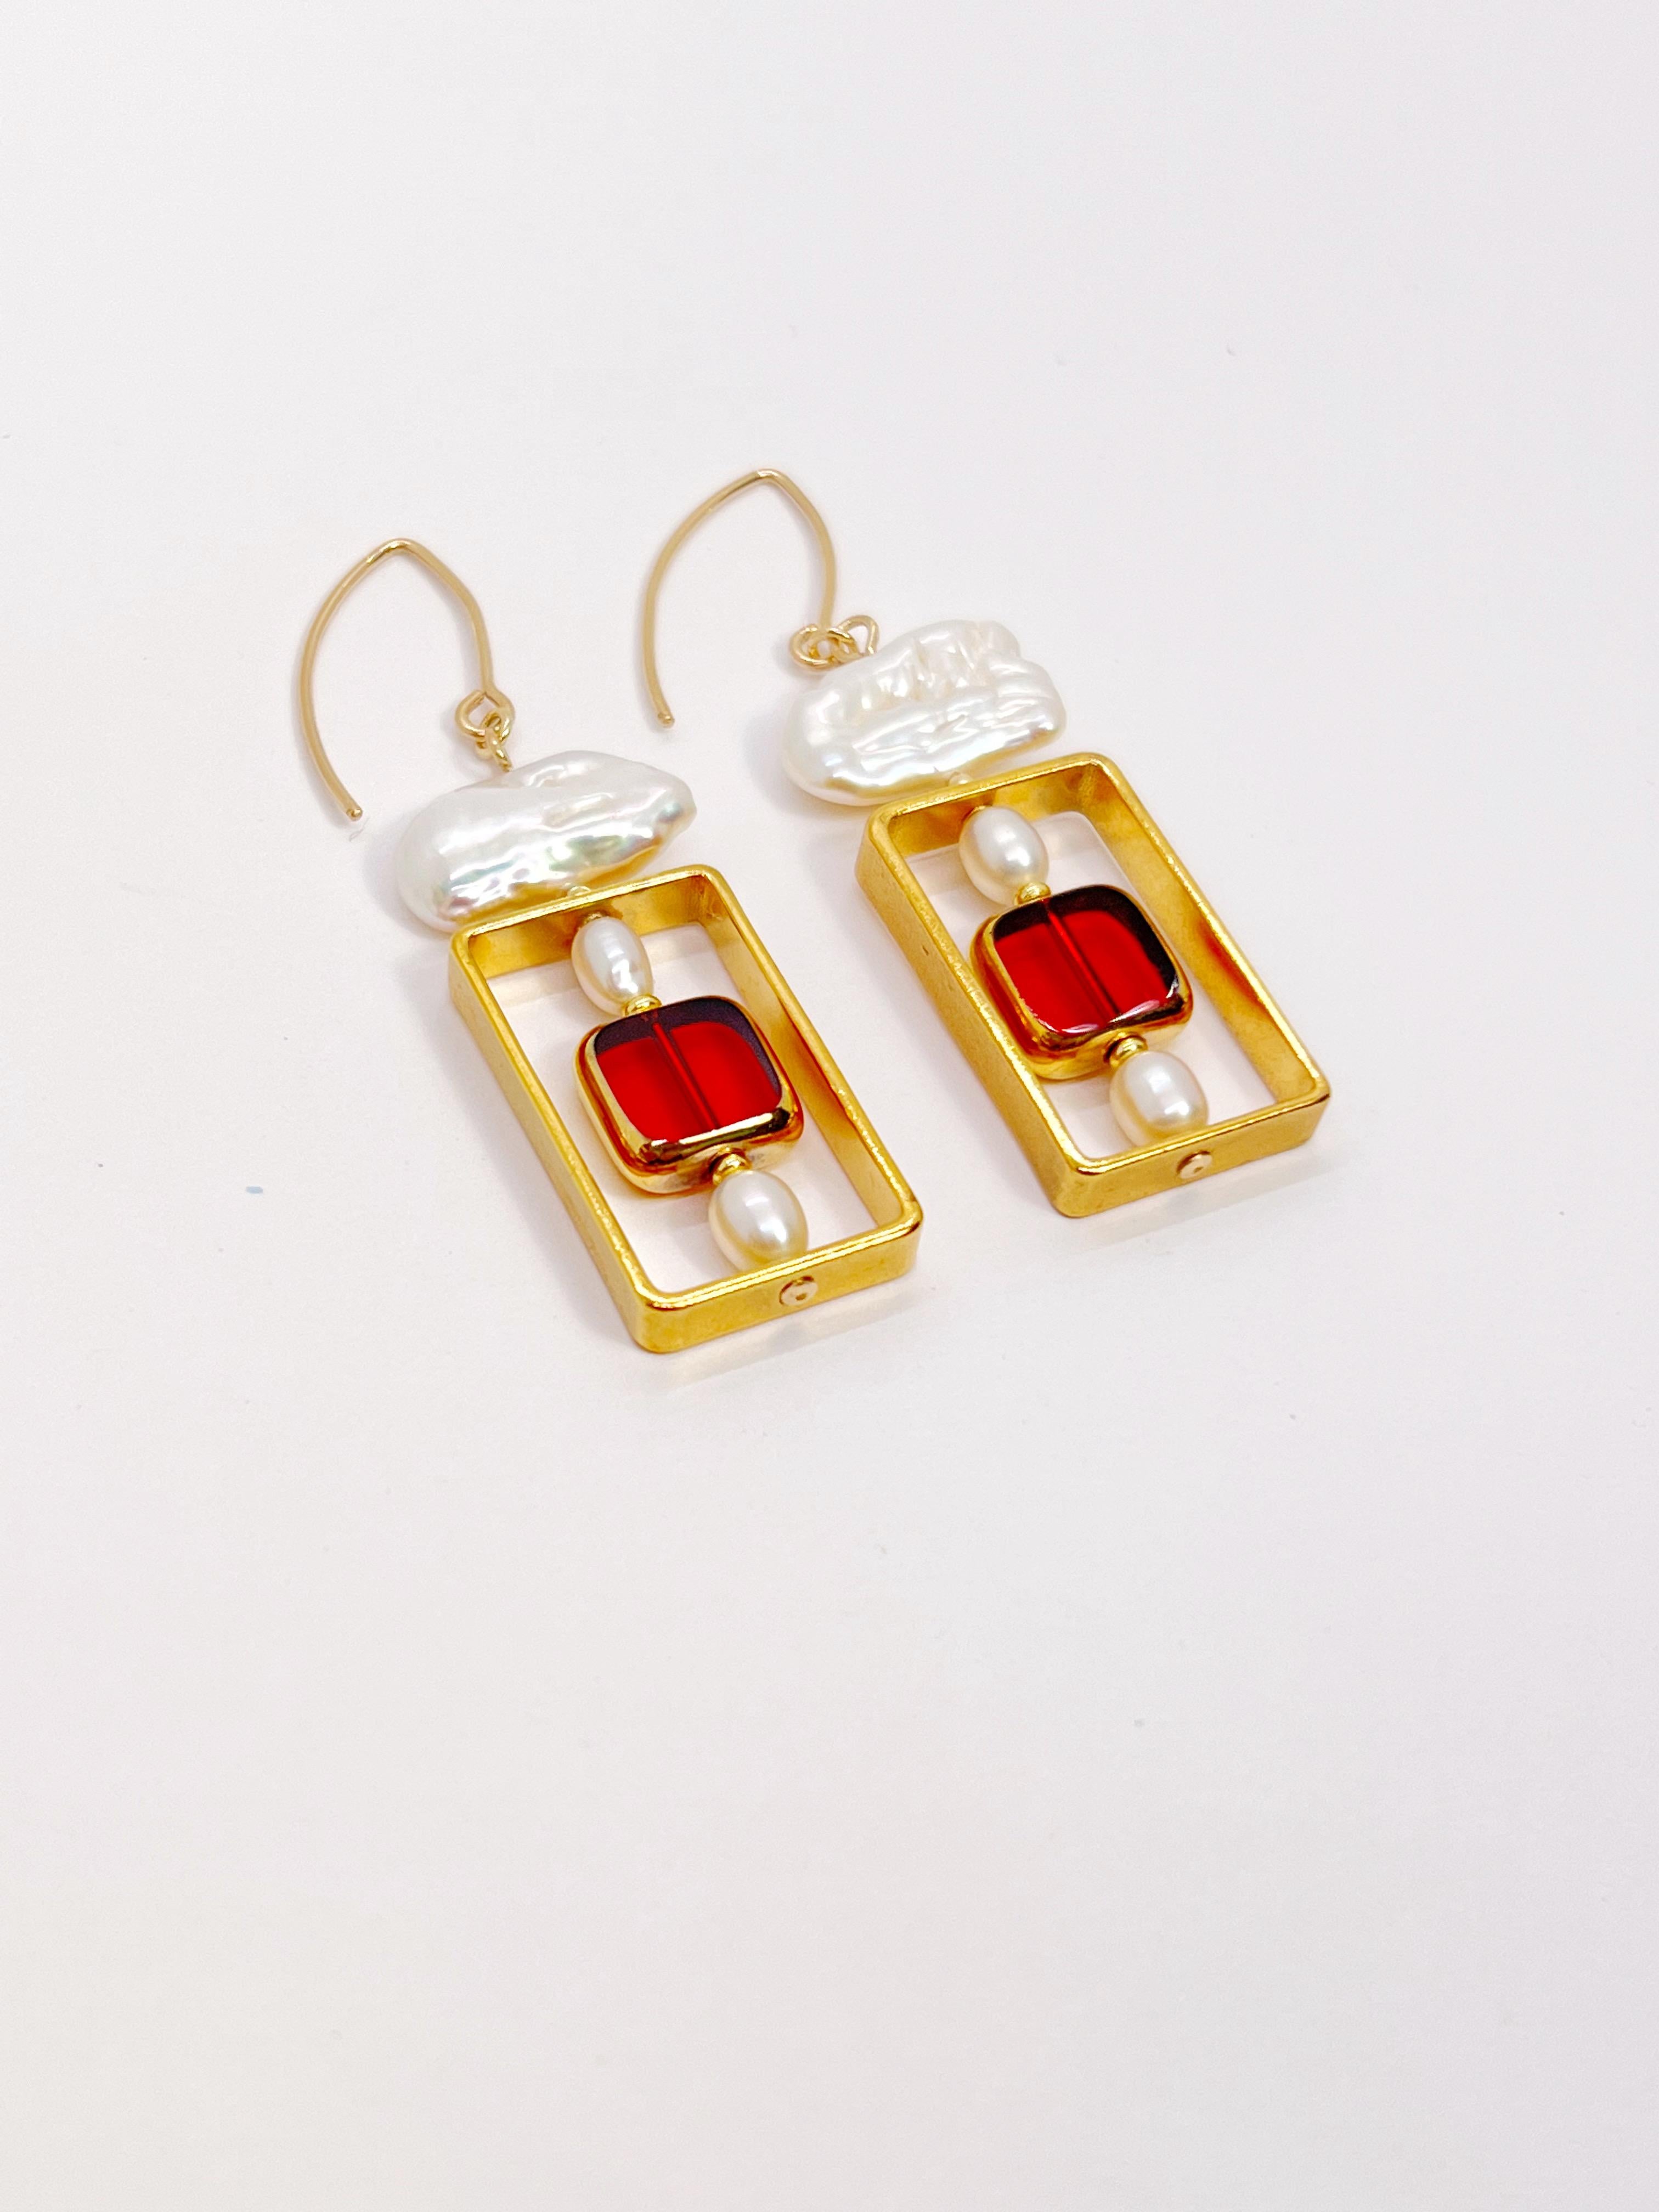 The earrings are lightweight and may rotate and reposition with movement.

The earrings are composed of a red square translucent German glass bead and complemented by freshwater pearls. They are new-old-stock vintage German glass beads framed with